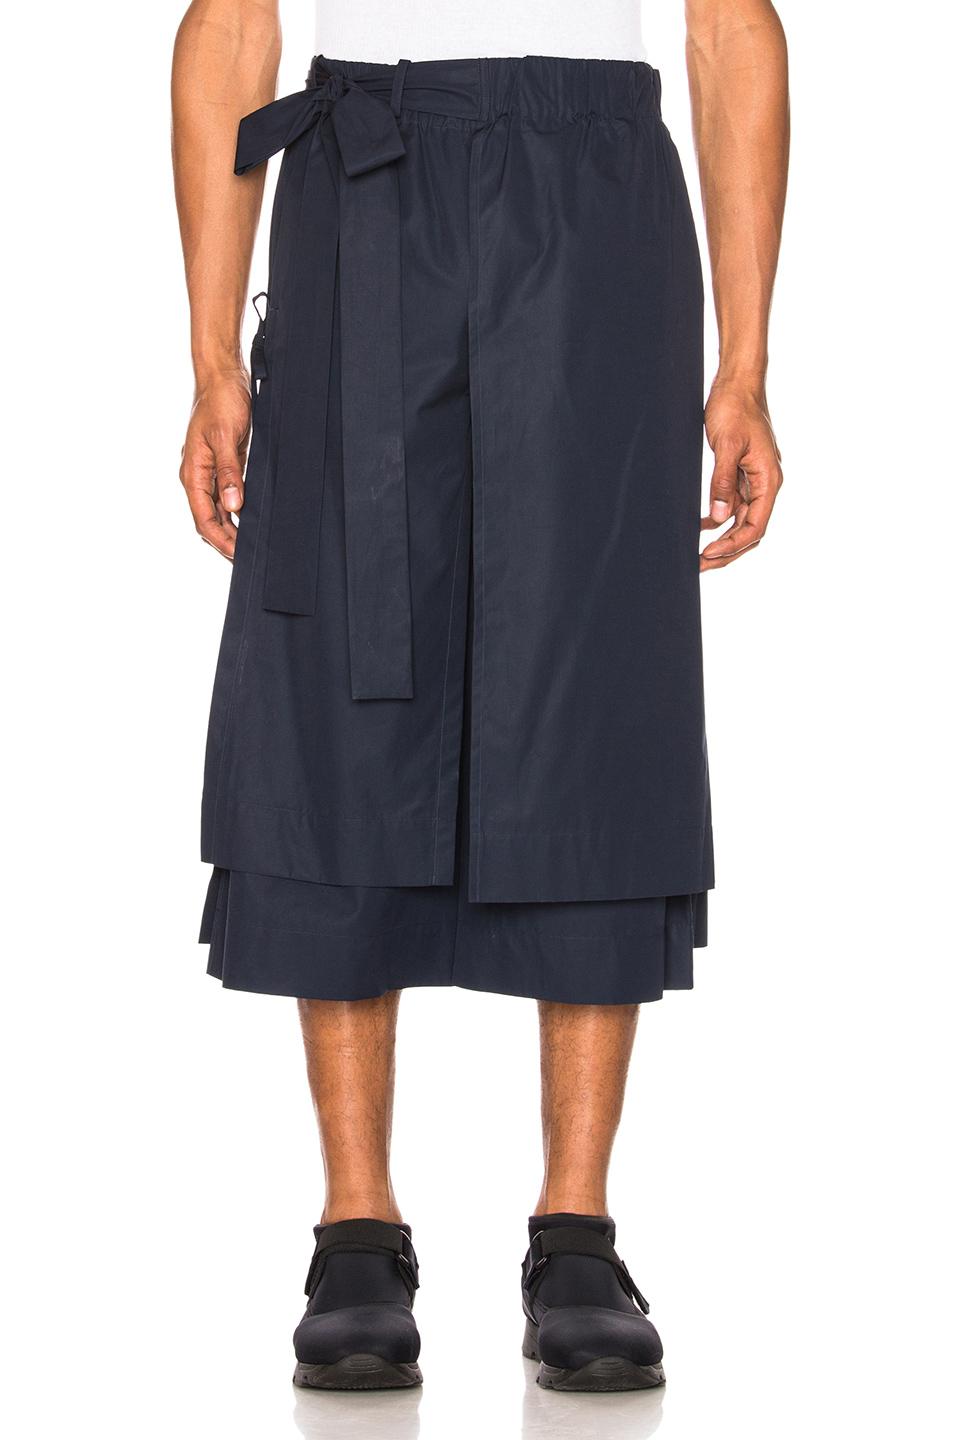 Craig Green Layered Cotton Track Shorts in Navy (Blue) for Men - Lyst